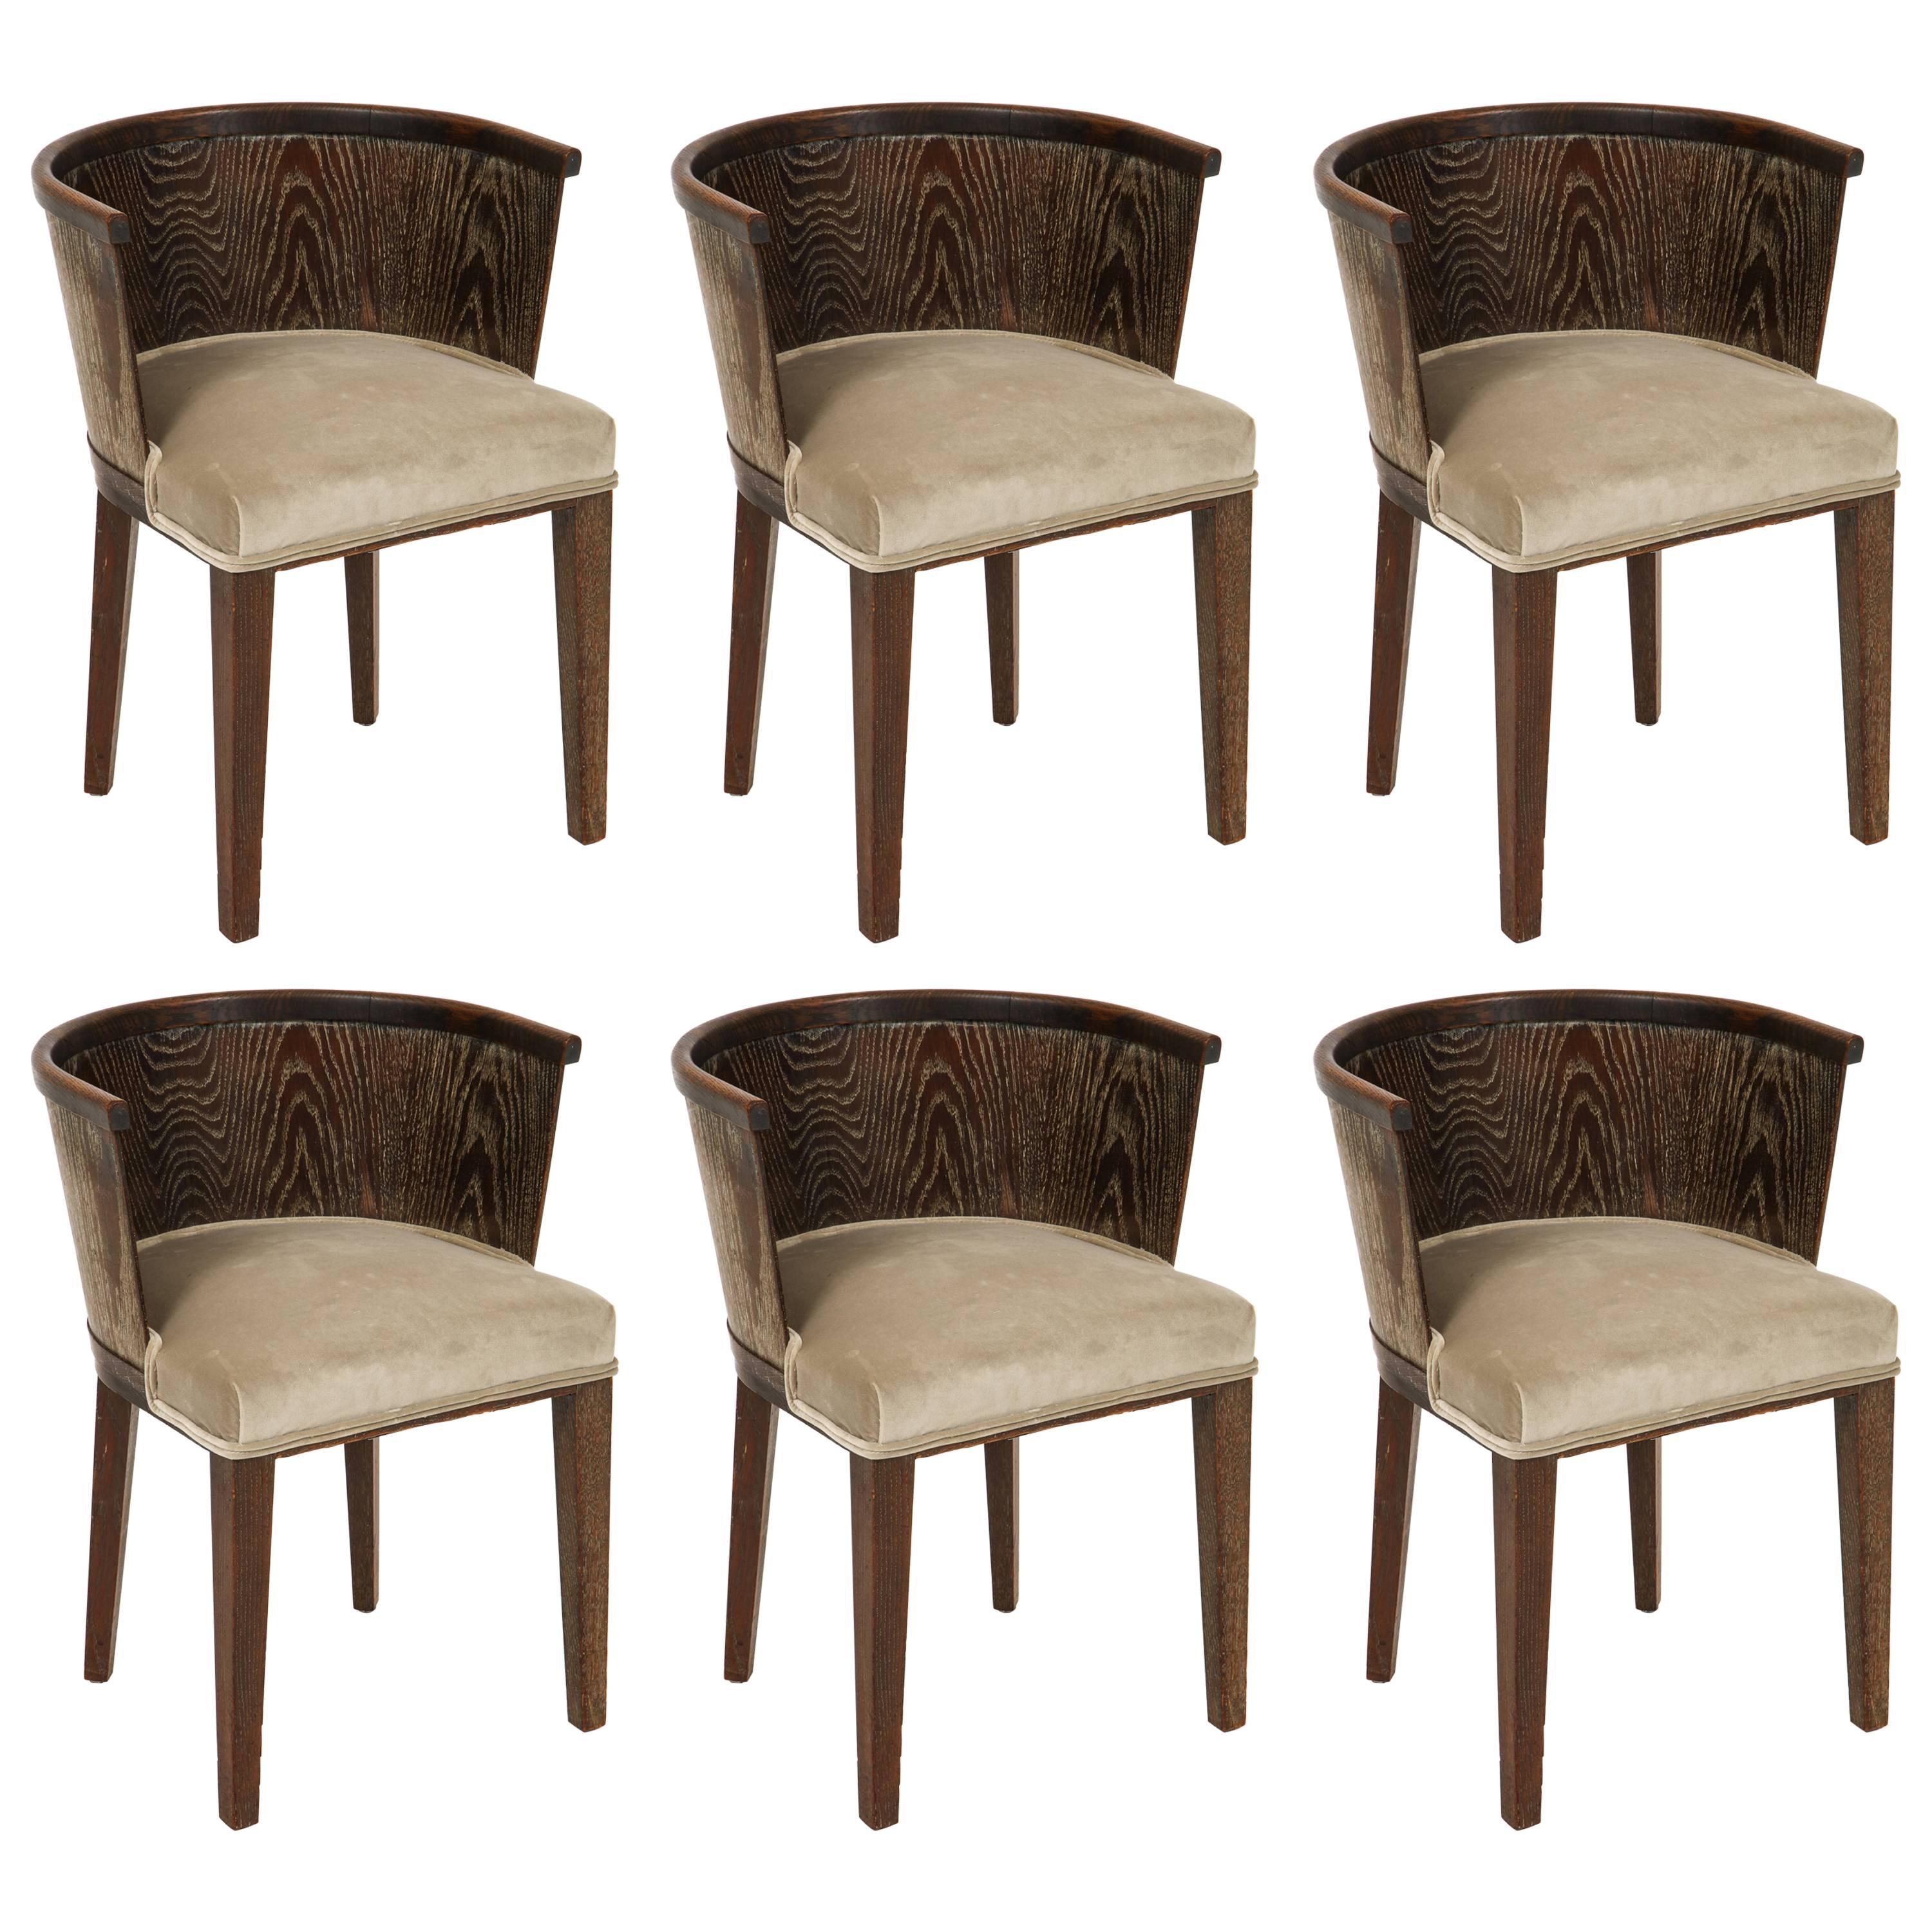 Marjorelle six cerused grey oak barrel chairs Art Deco, France, 1930-1940

Beautiful and rare. Six brown cerused barrel chairs in amazing original condition with new grey upholstery. 
These came as a set with a table and are sold with the table